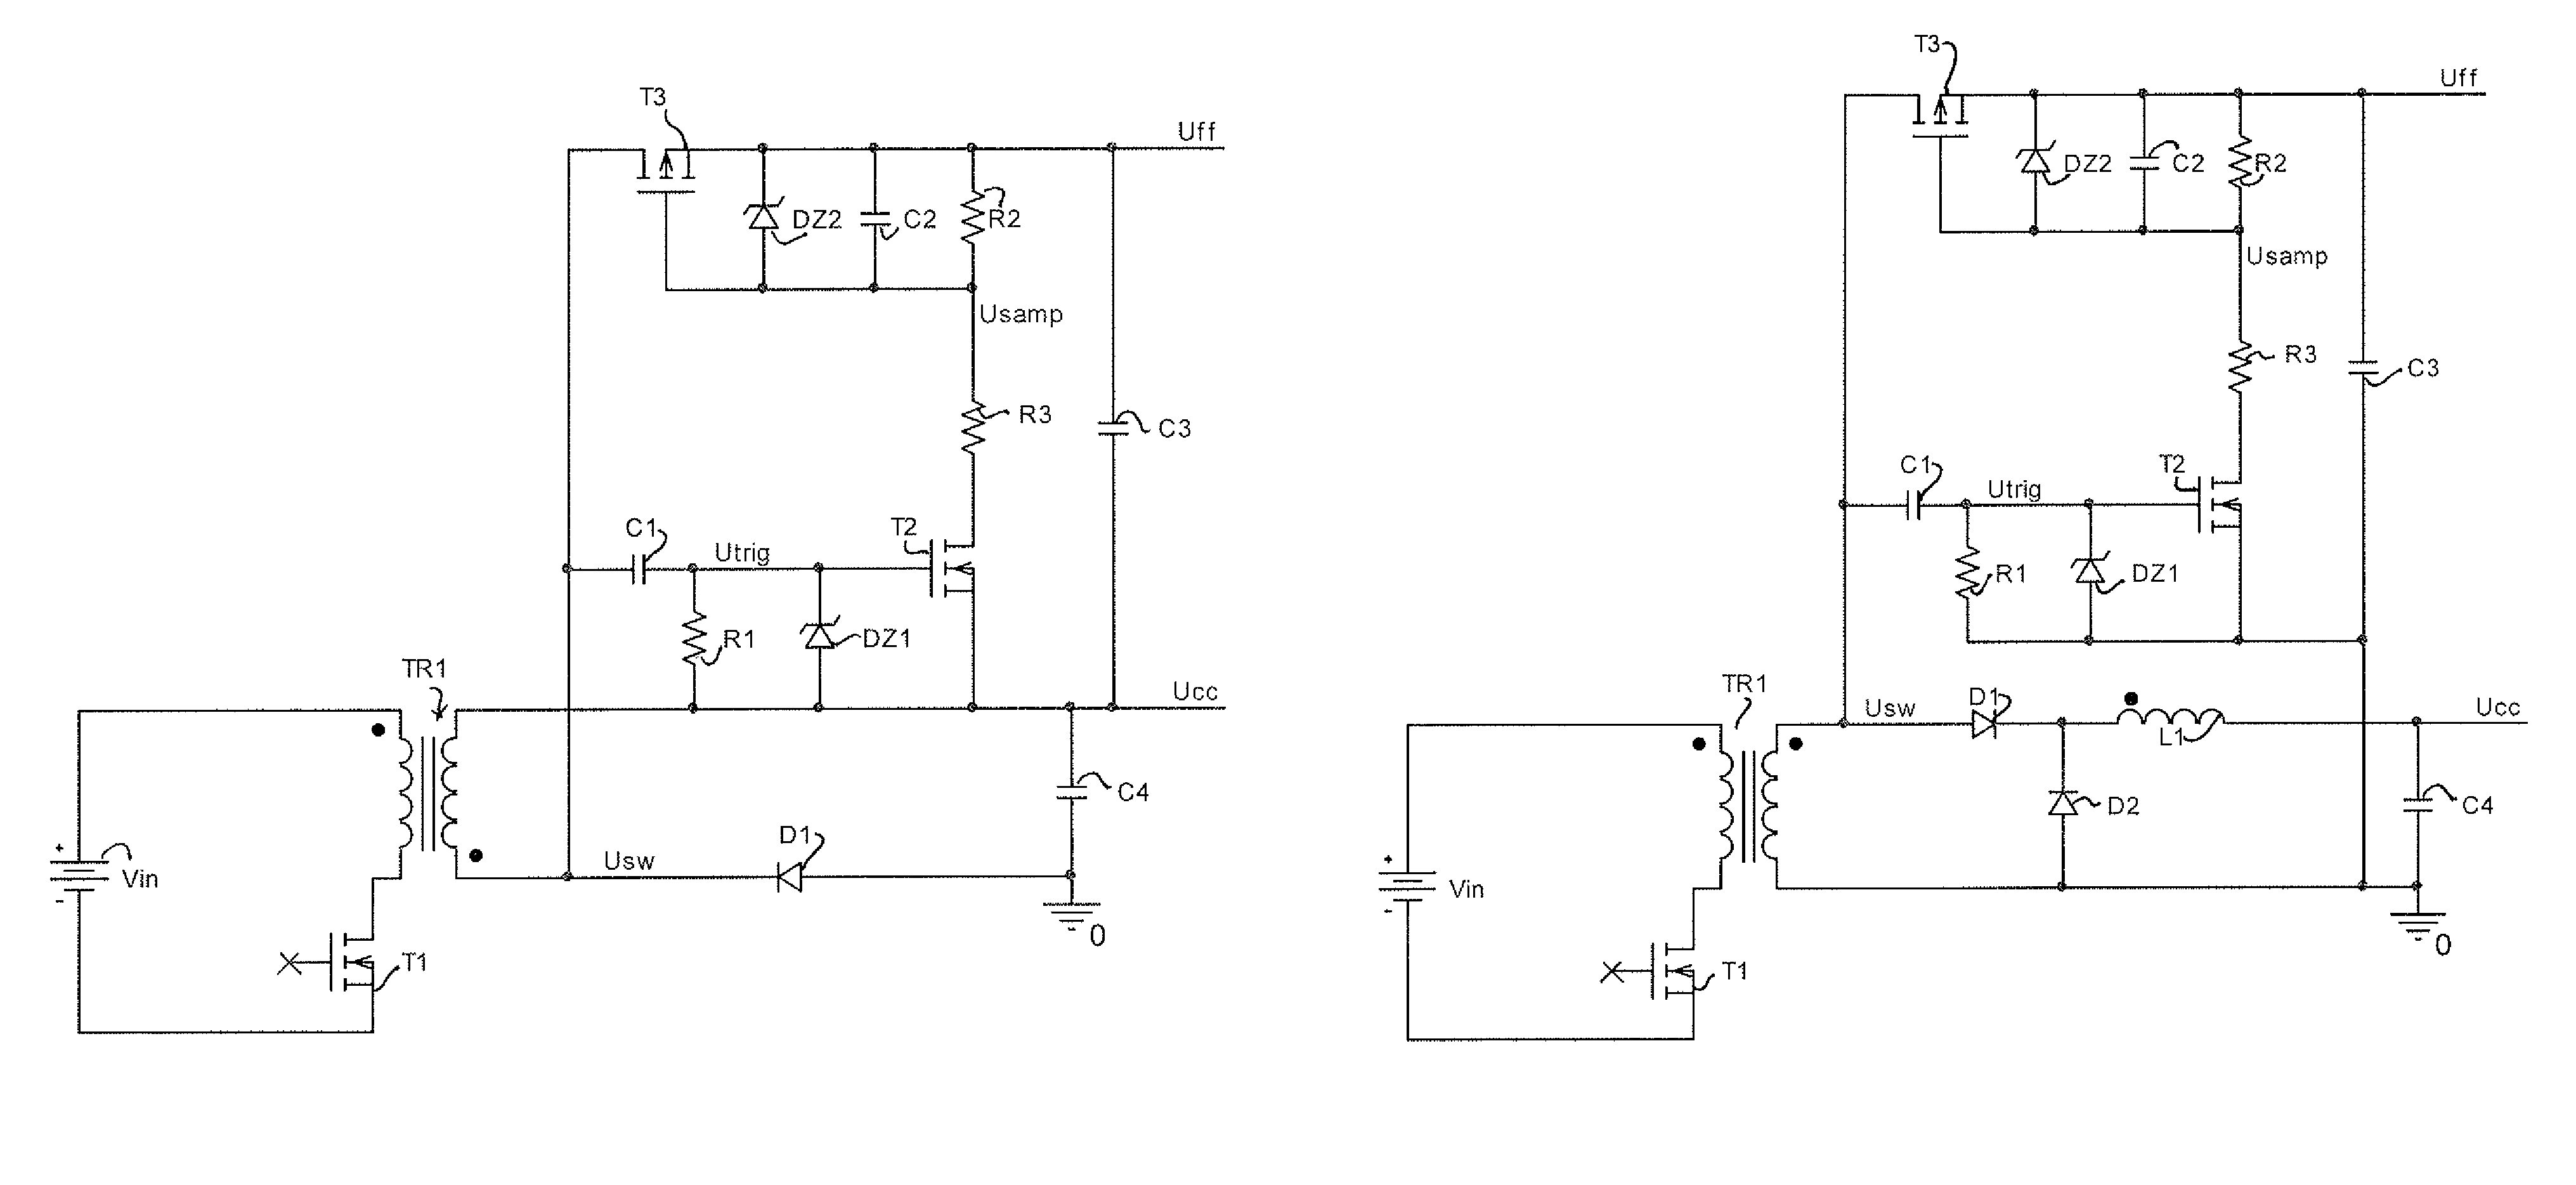 Power converter utilizing a RC circuit to conduct during the rising edge of the transformer voltage